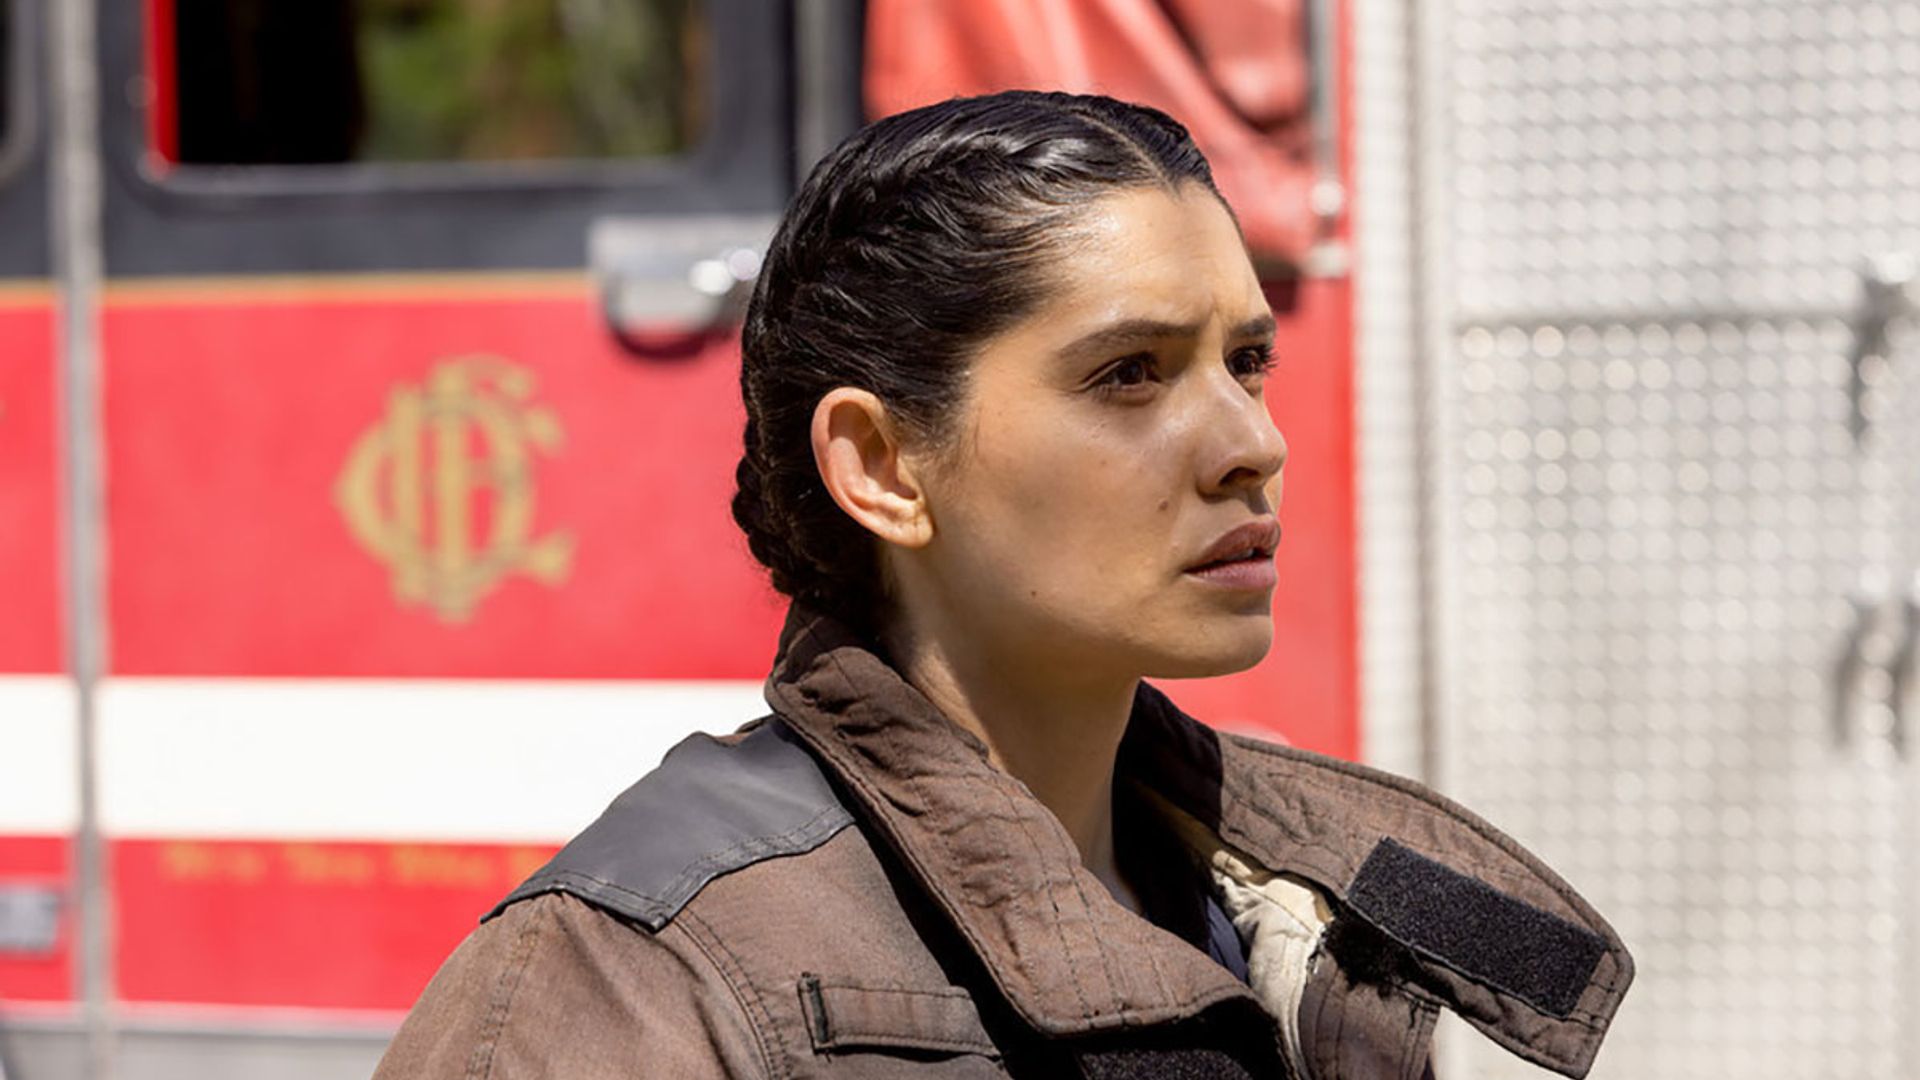 Miranda Rae Mayo reunites with former Chicago Fire star for a new movie - and fans can't contain their excitement